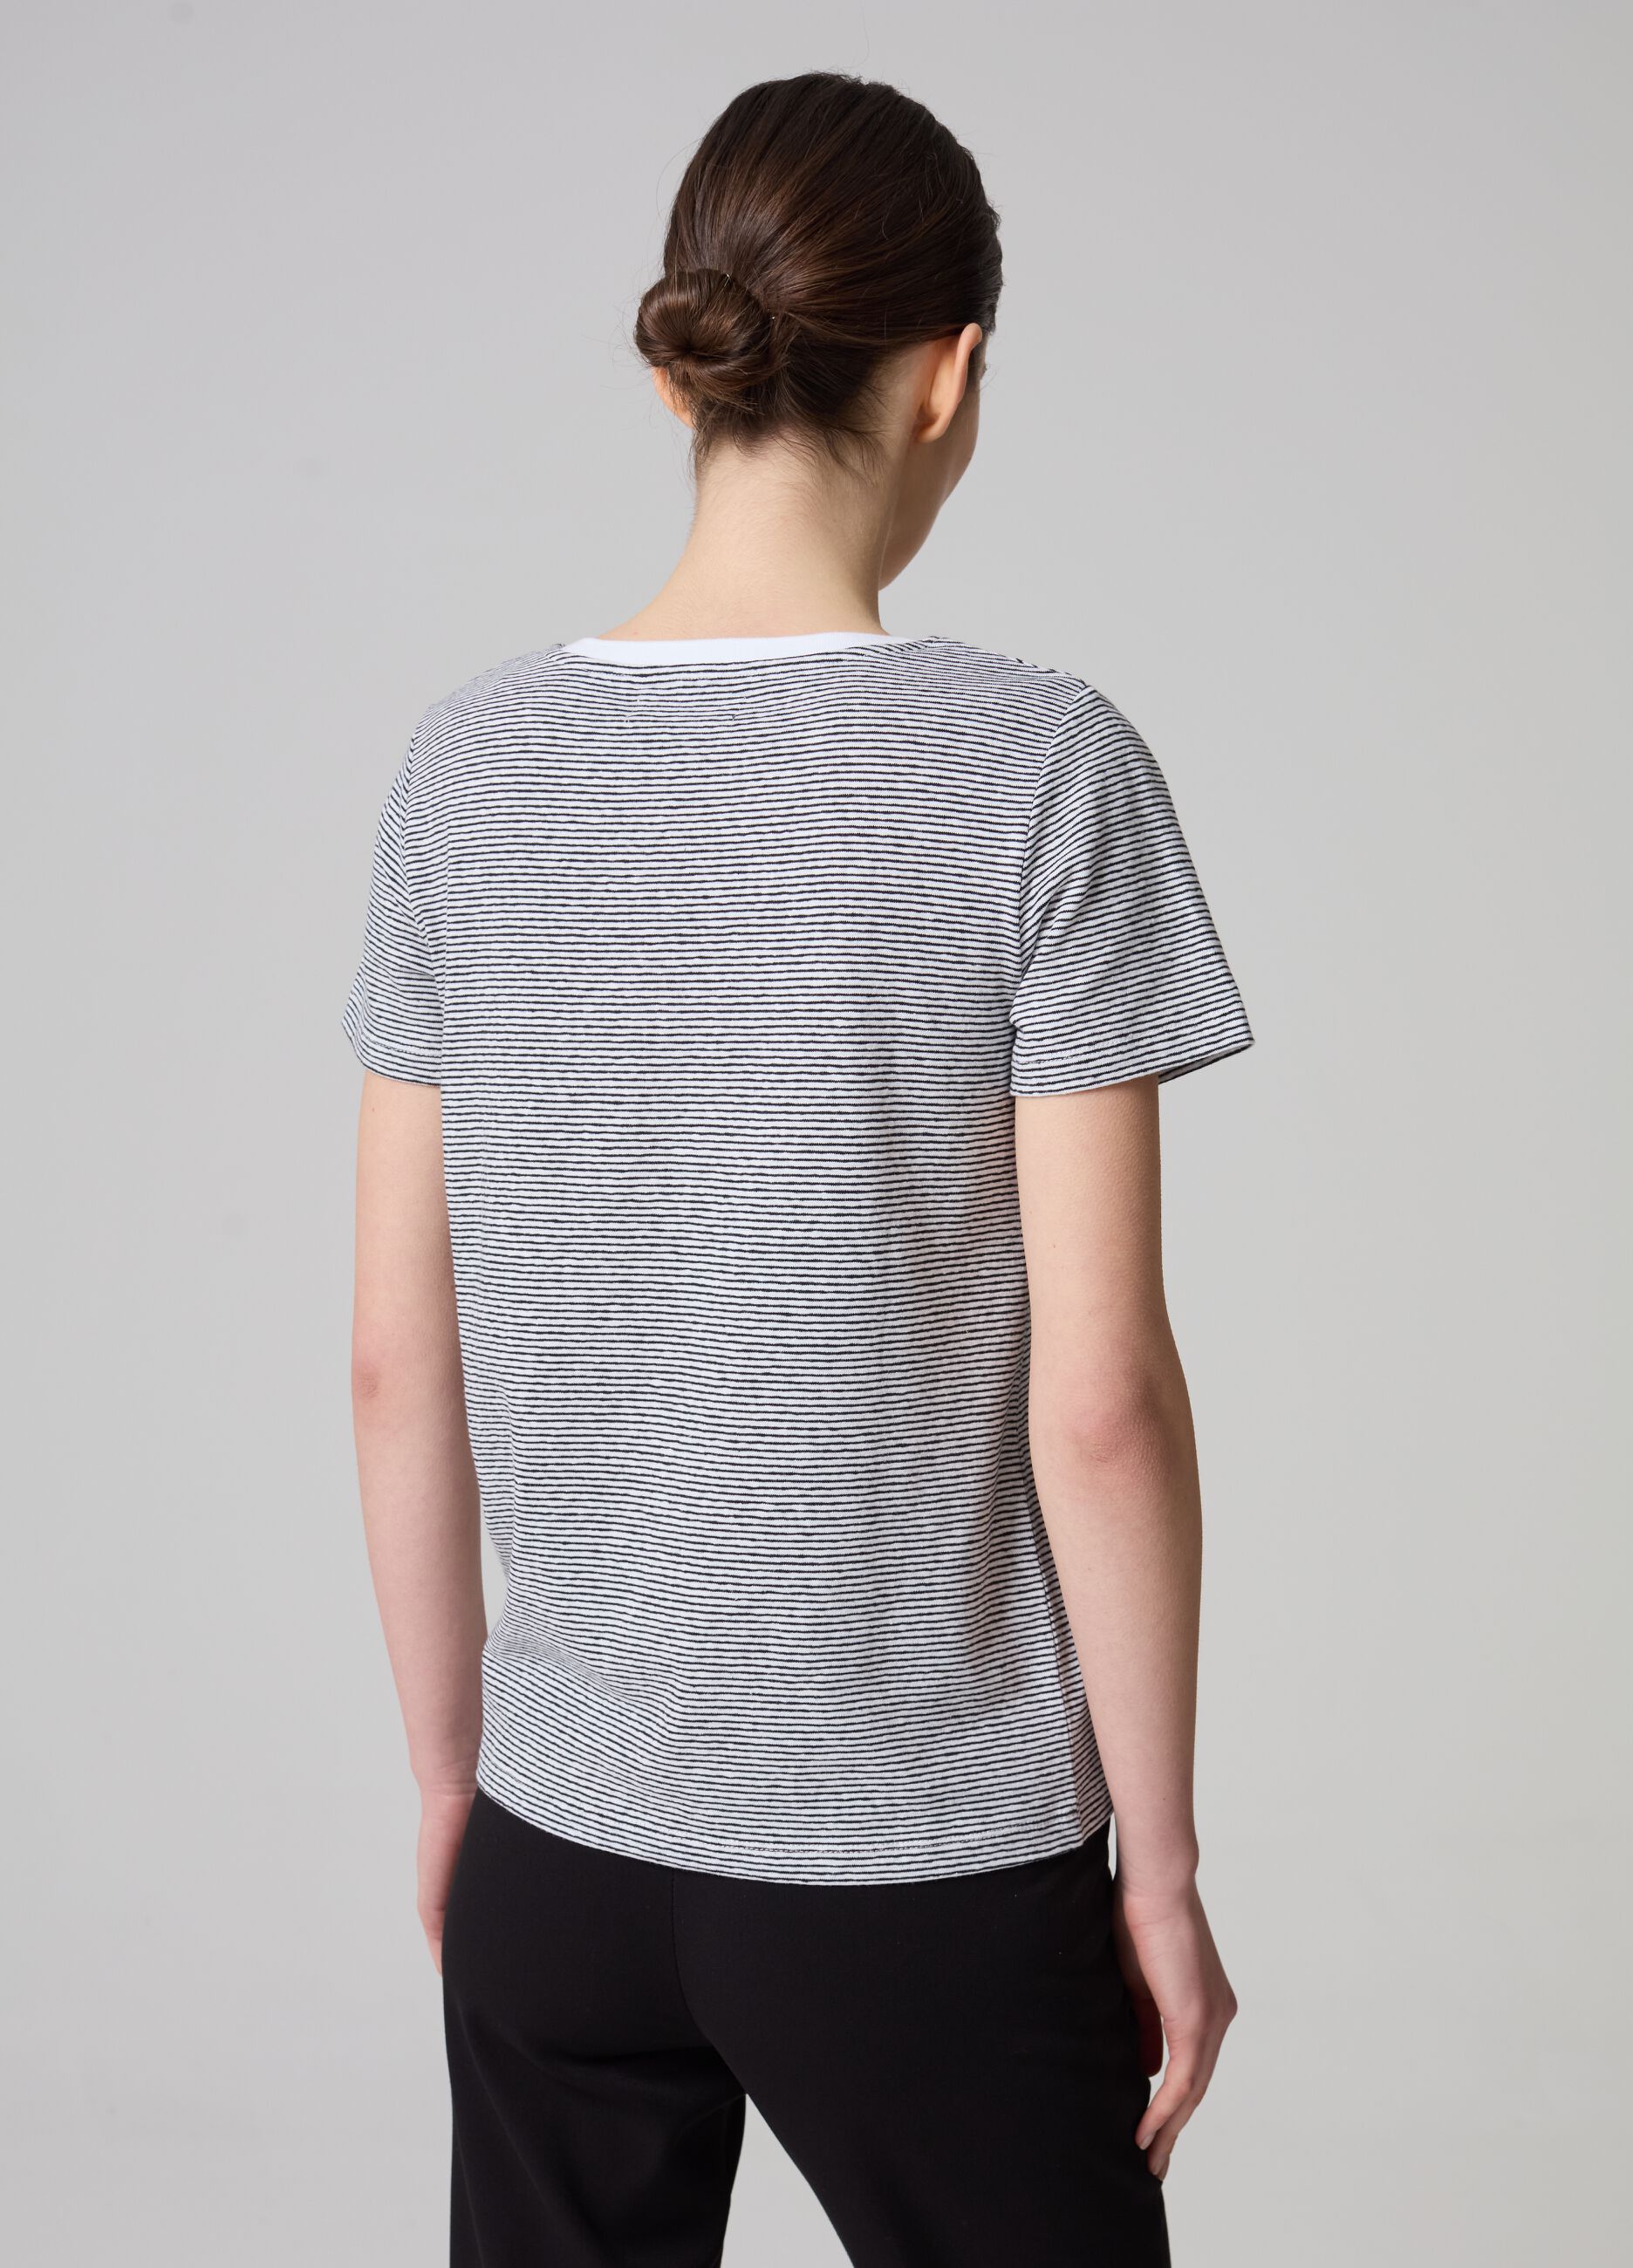 Contemporary T-shirt with thin stripes